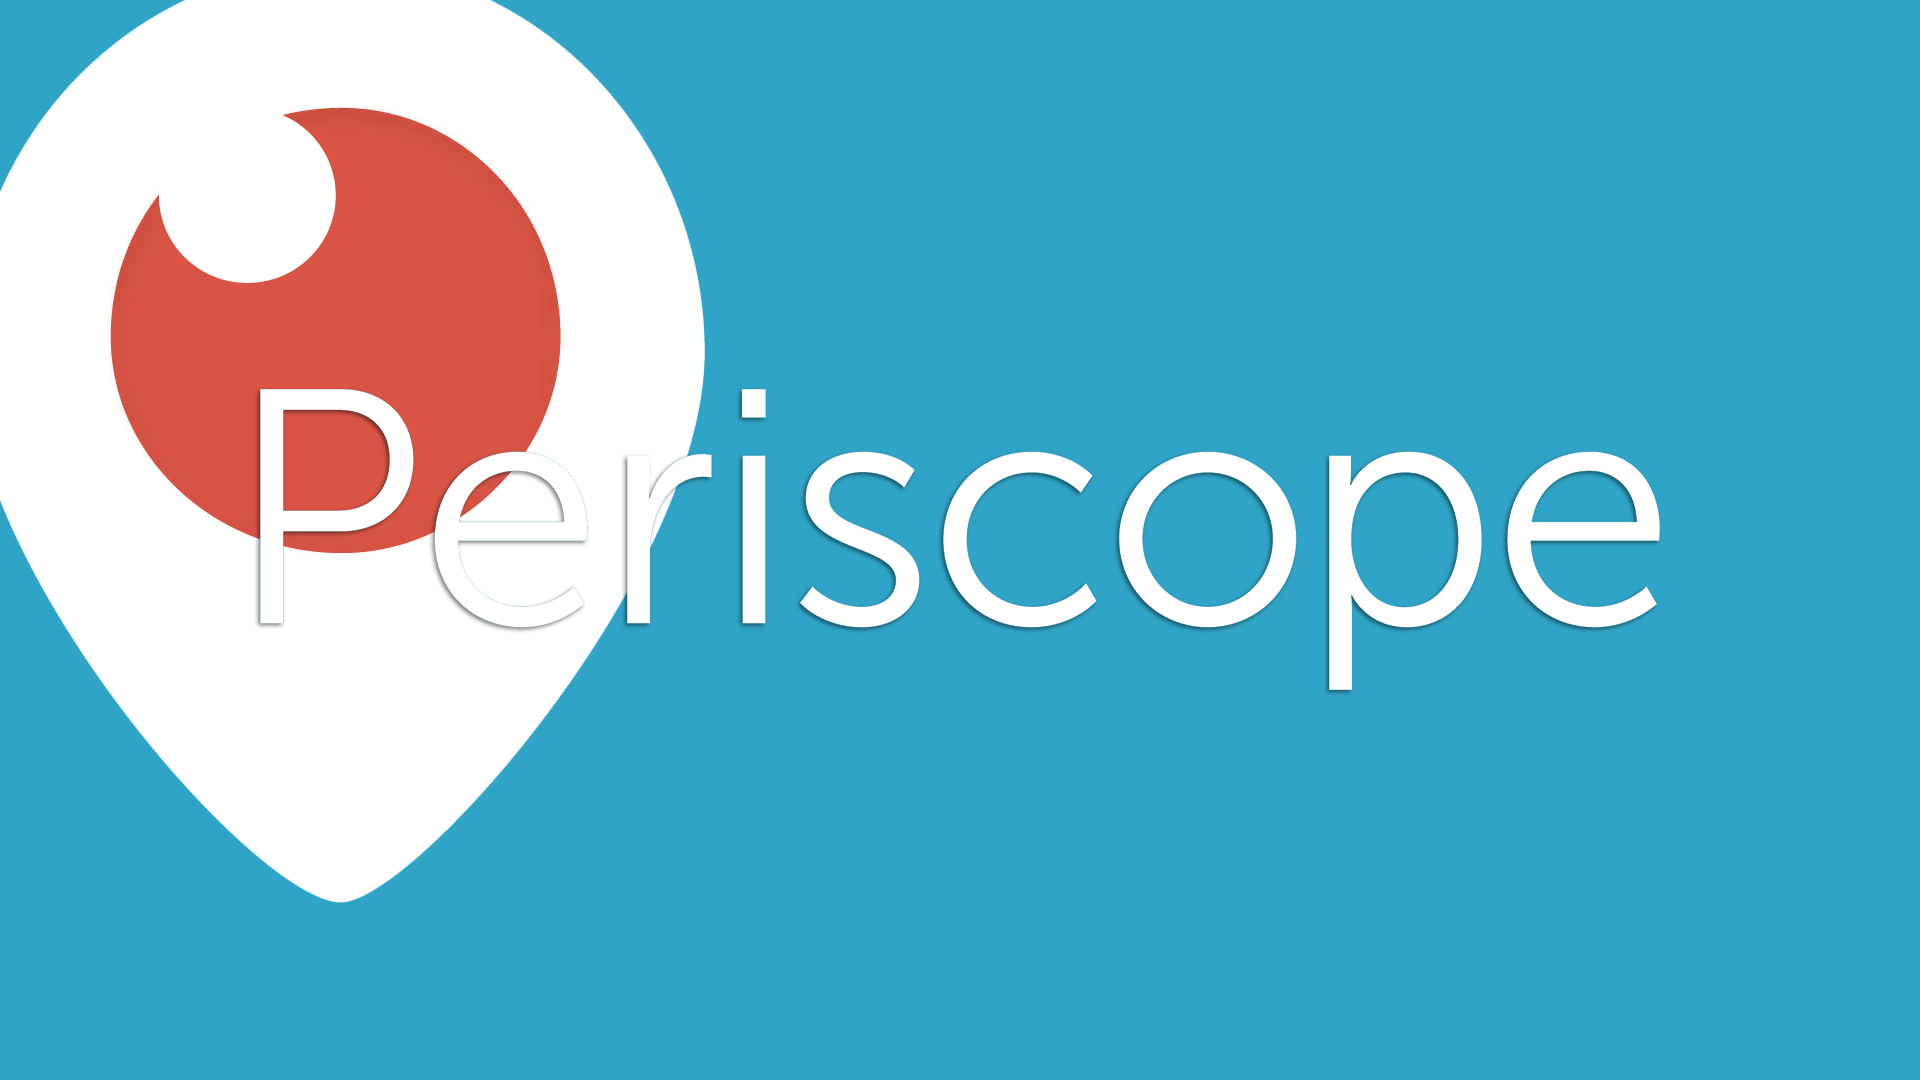 Twitter to bring pre-roll ads to Periscope videos